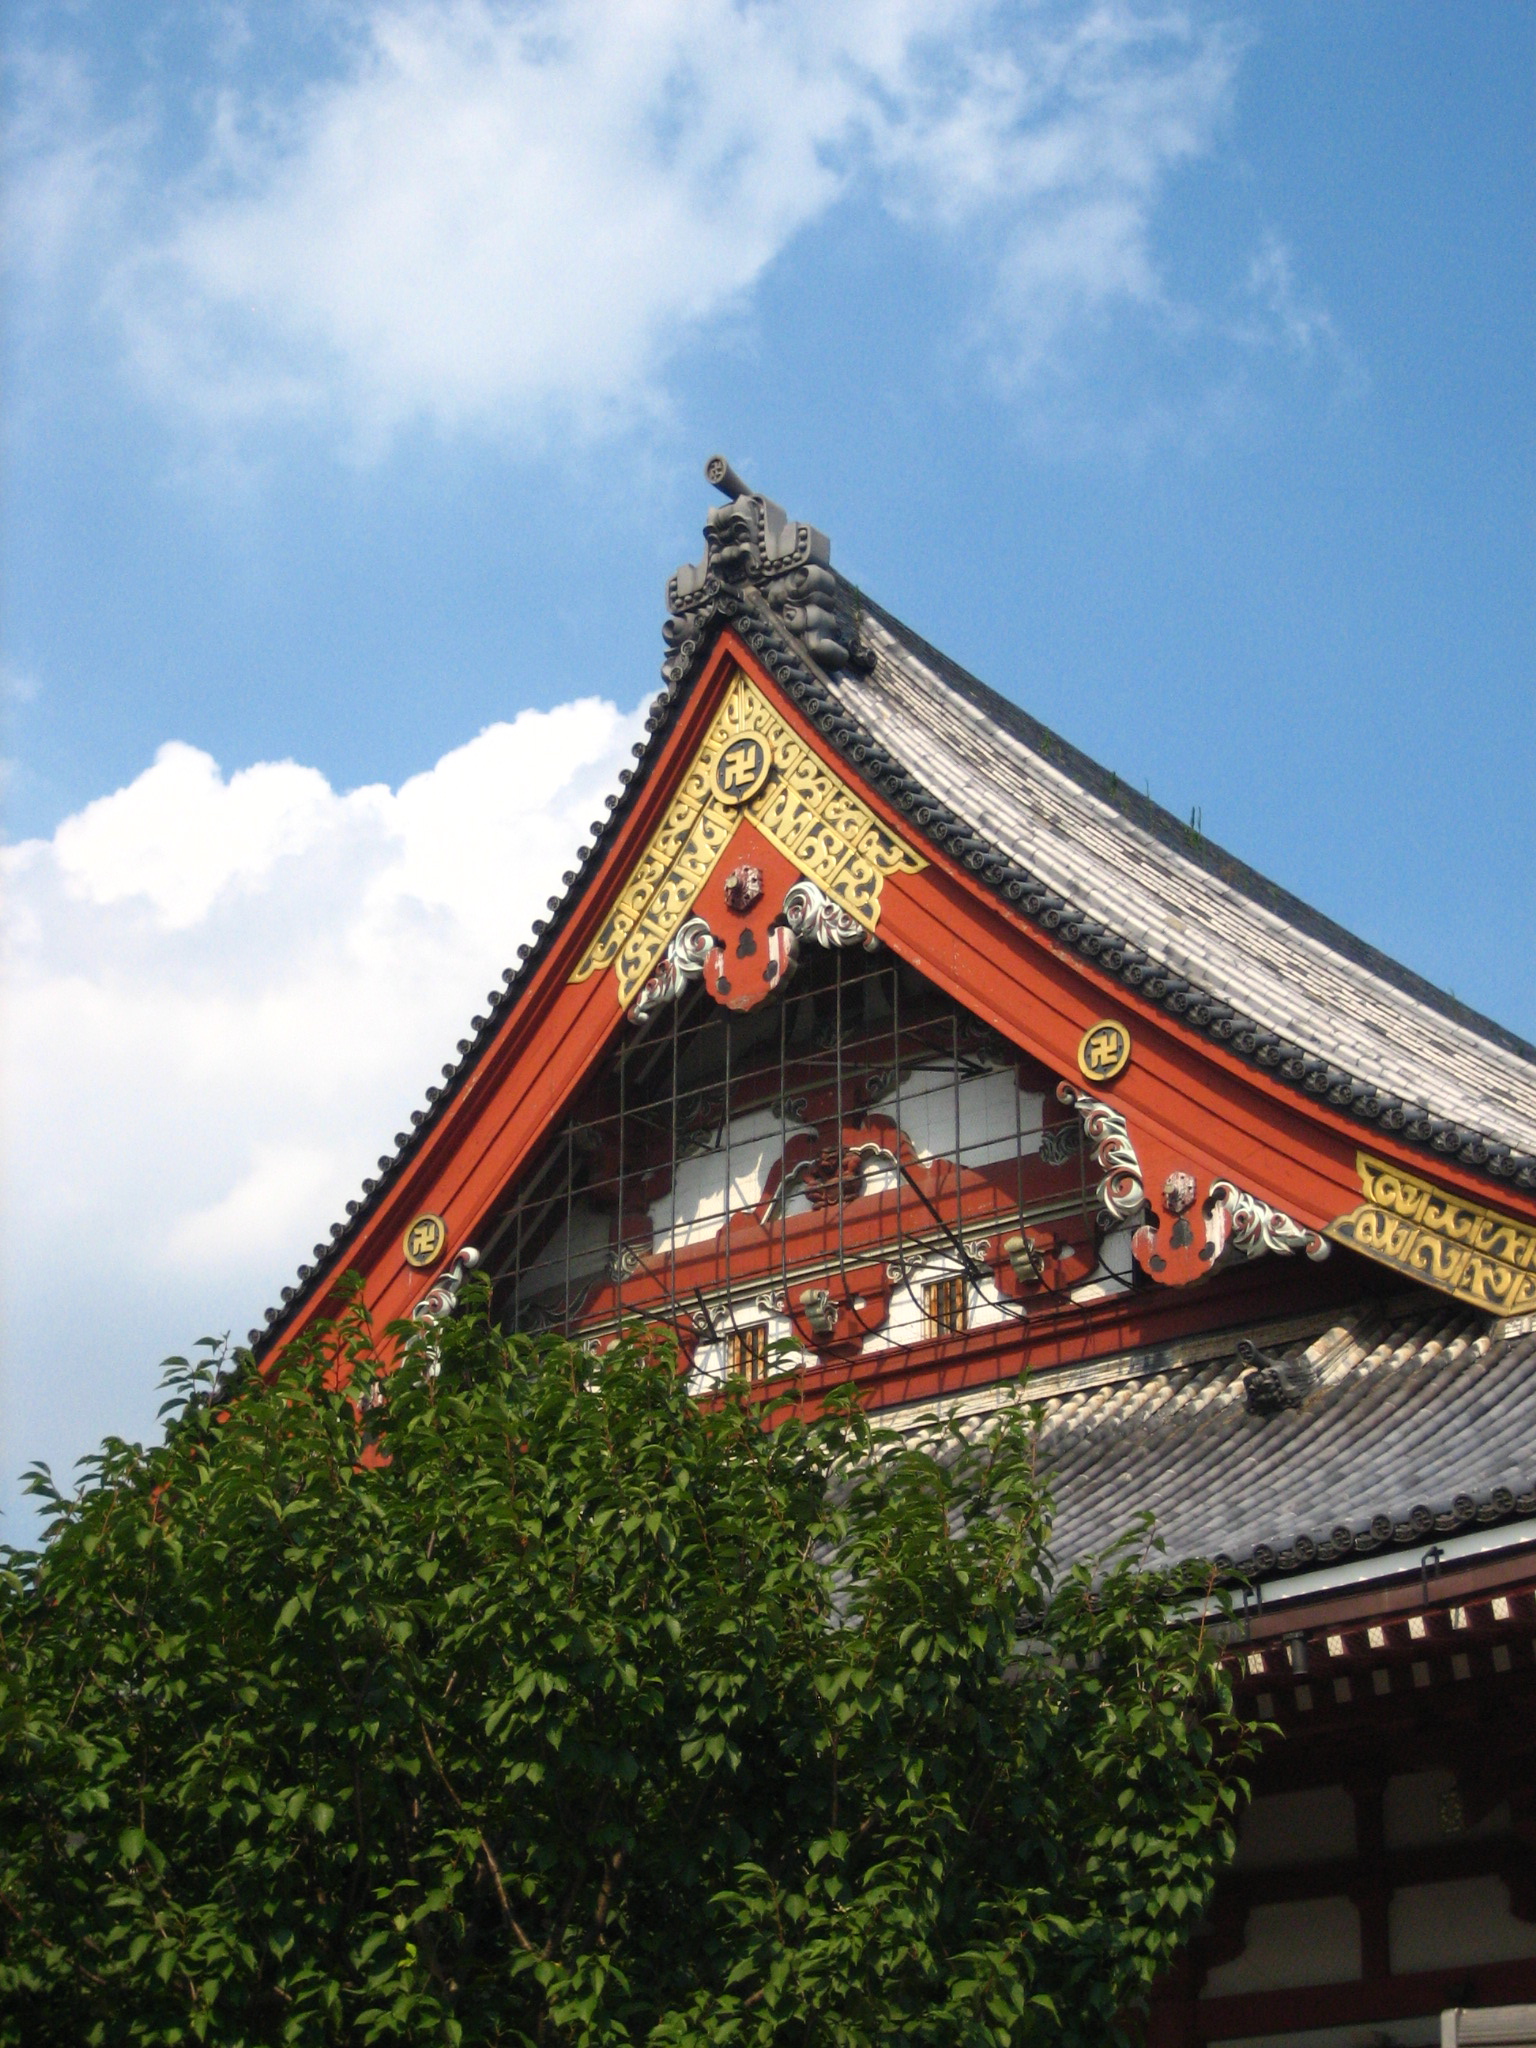 the roof of a building with designs and decorative details